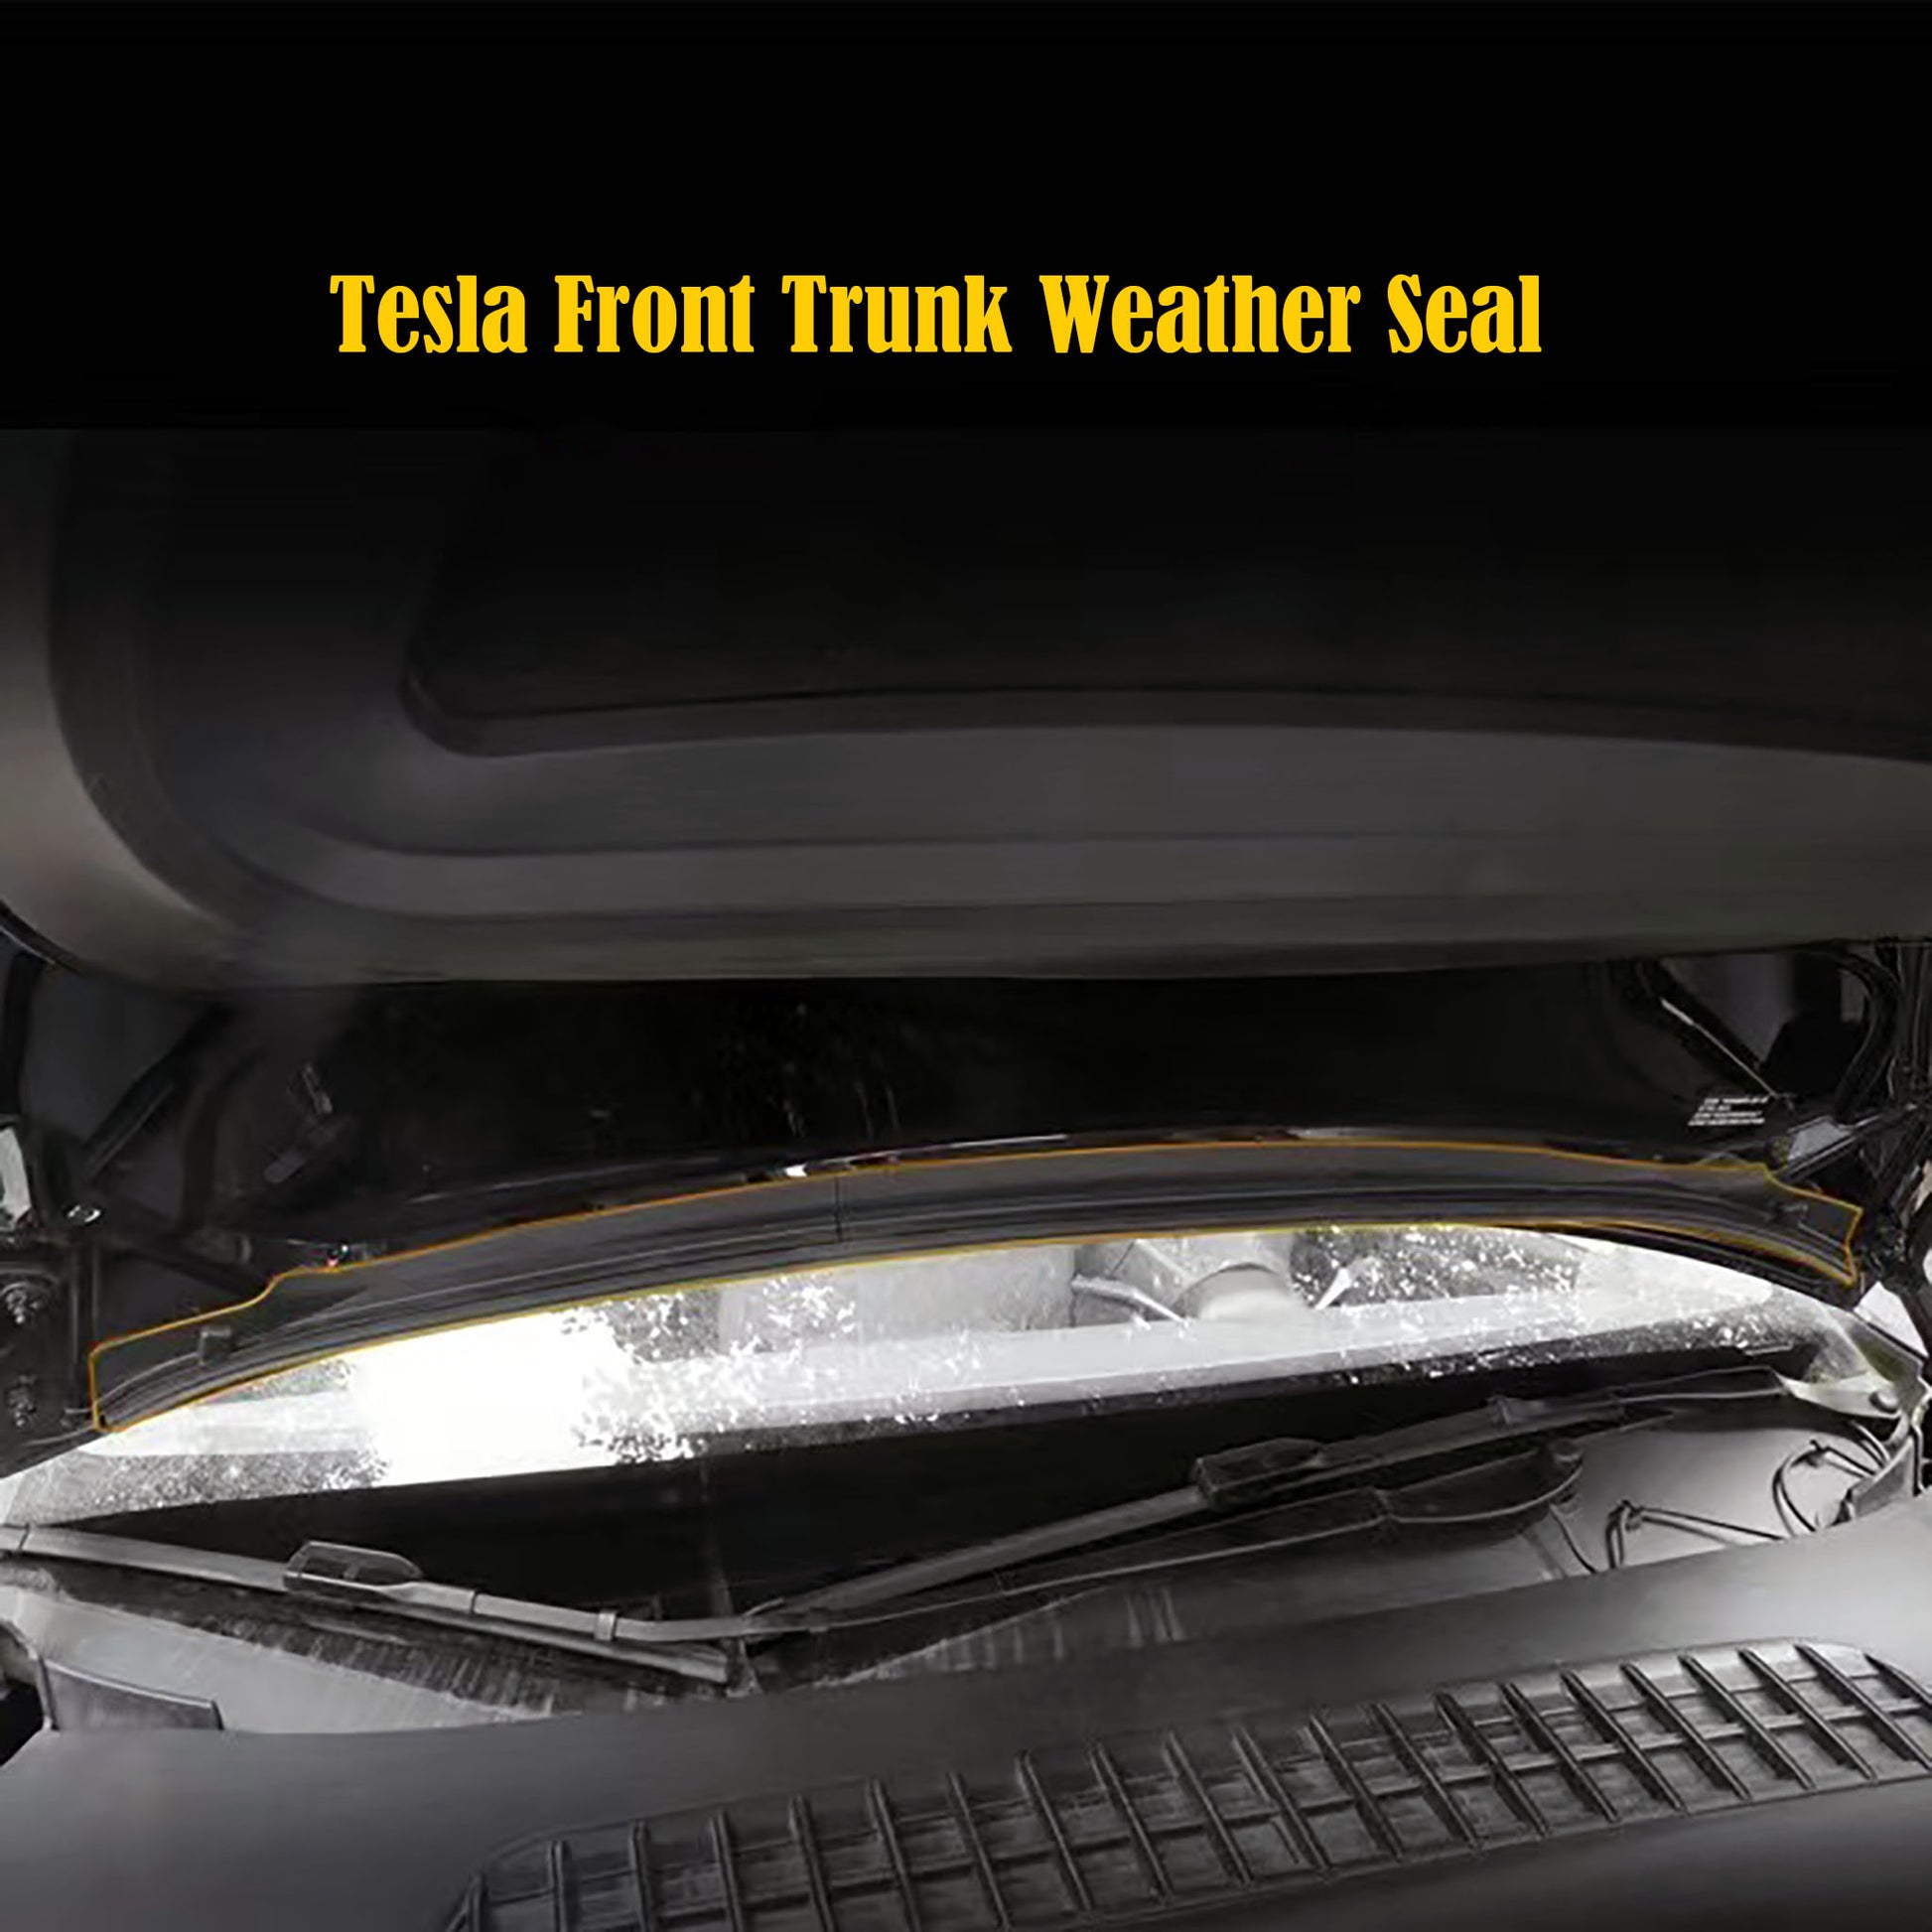 Frunk Weather Seal for Tesla Model 3 and Y. Deflects Rain, Dust